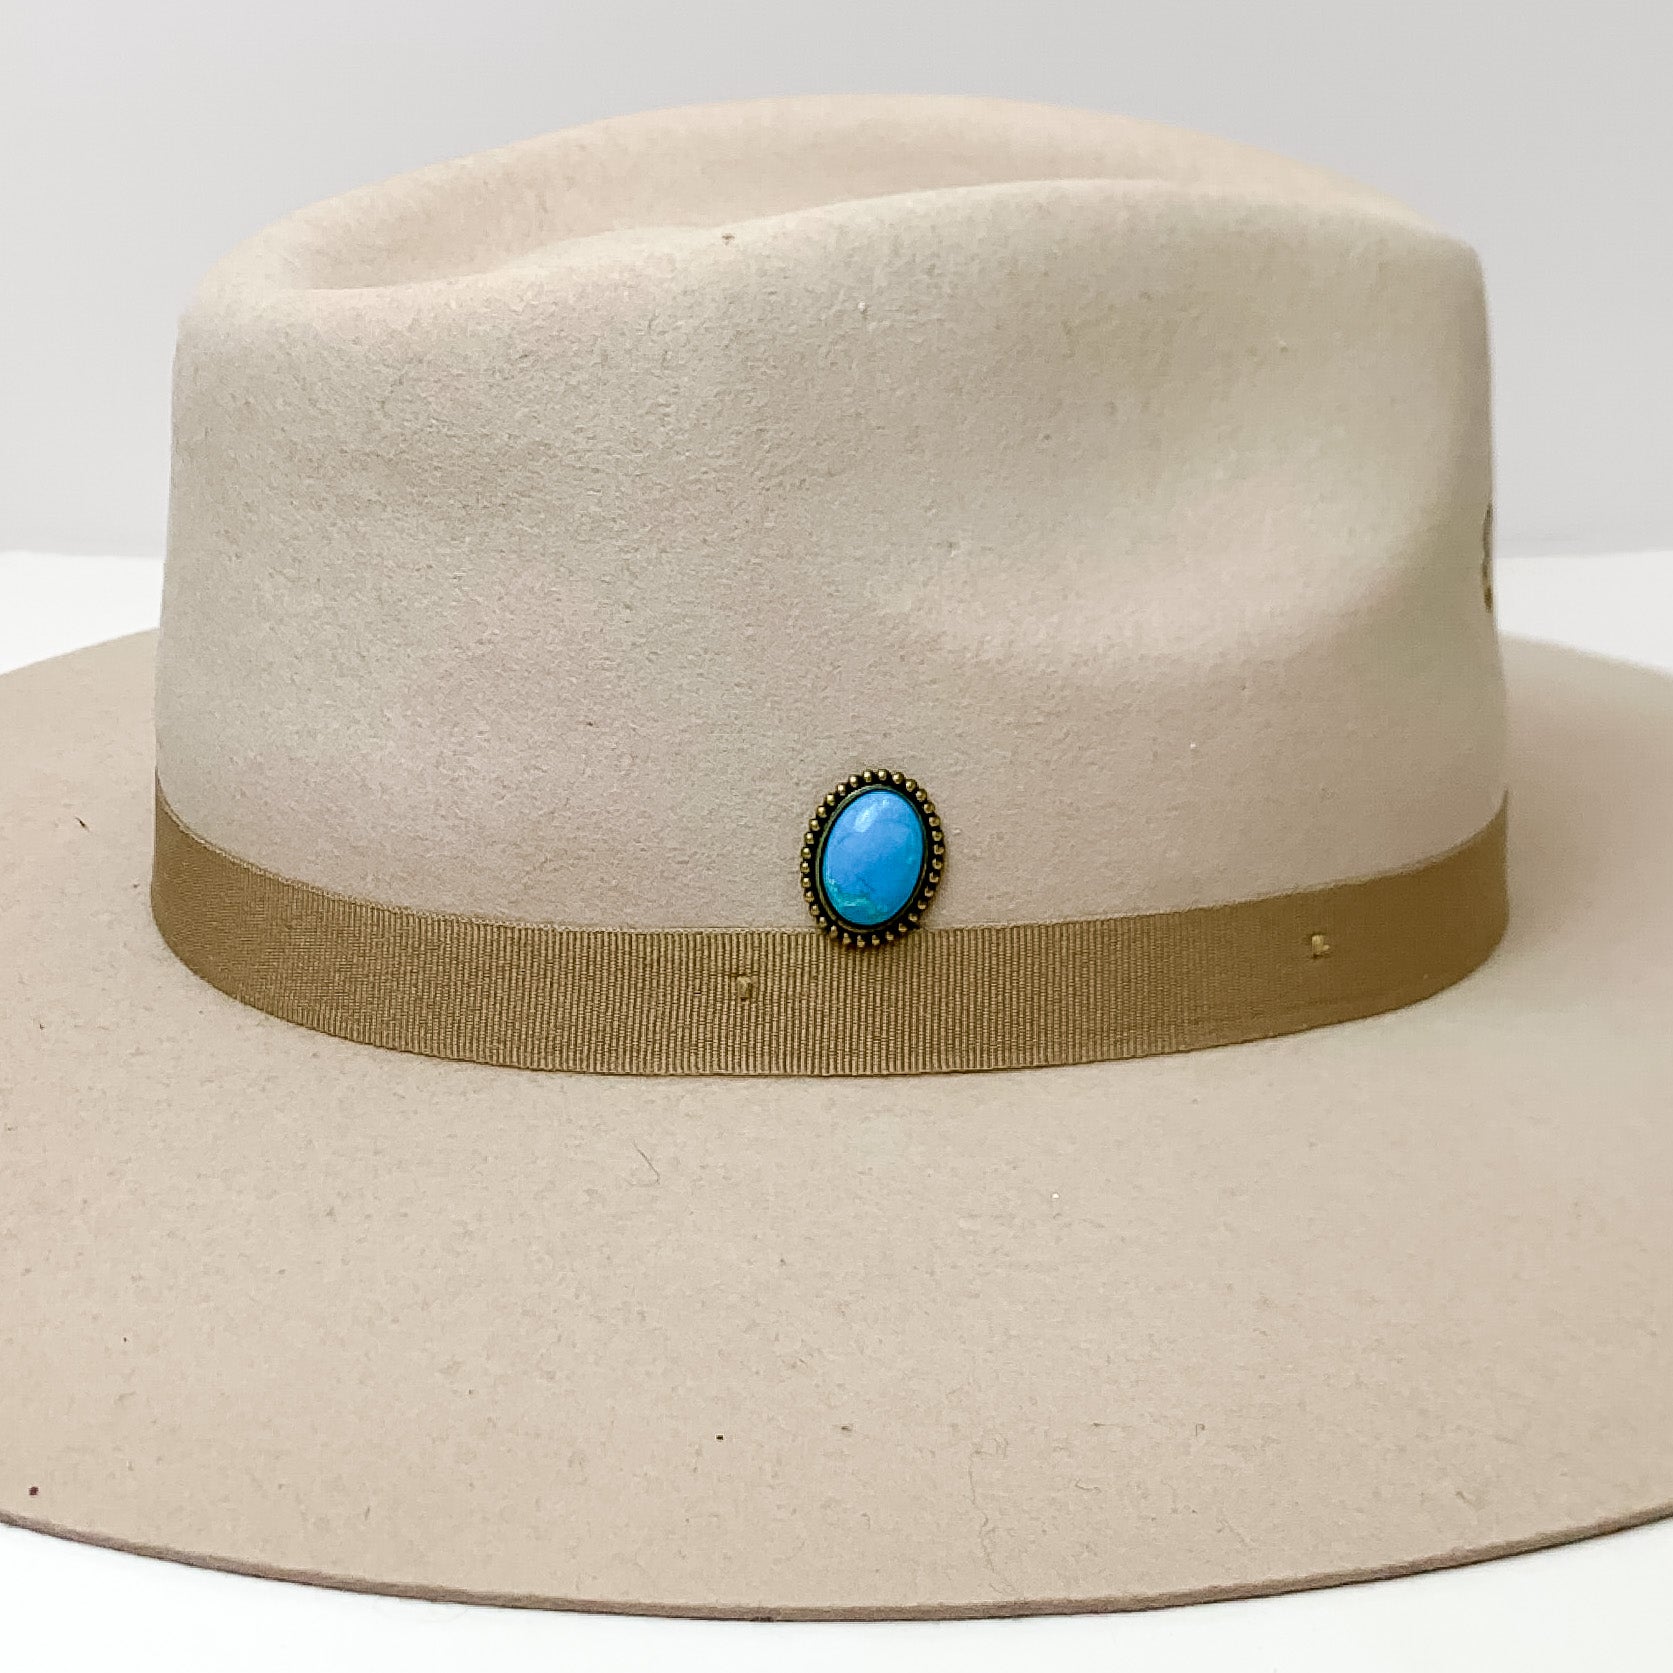 Pink Panache | Bronze Tone Oval Hat Pin with Turquoise Cabochon Stone